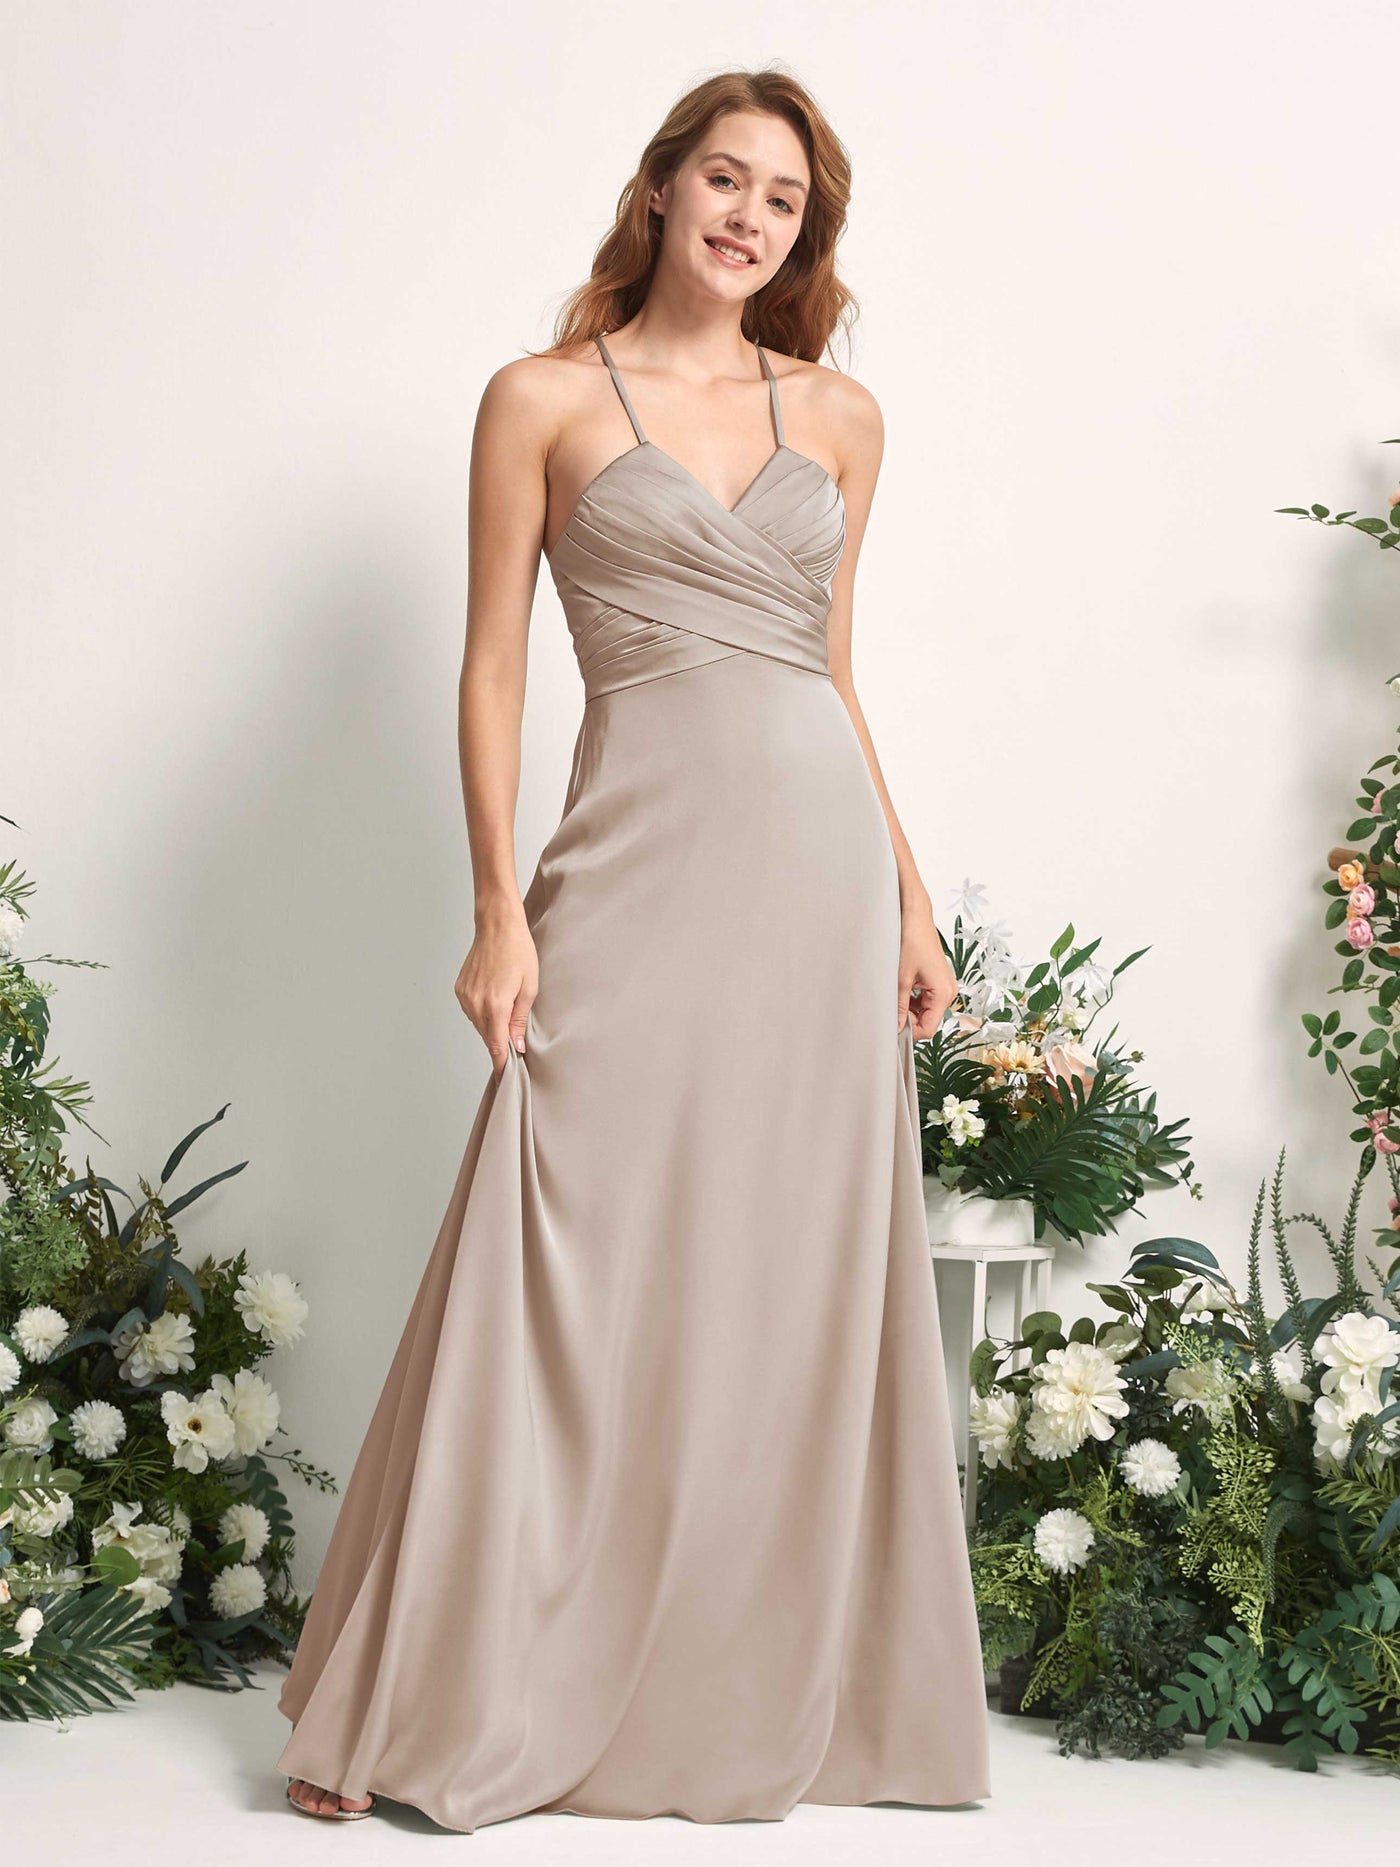 Taupe Bridesmaid Dresses Bridesmaid Dress A-line Satin Spaghetti-straps Full Length Sleeveless Wedding Party Dress (80225702)#color_taupe